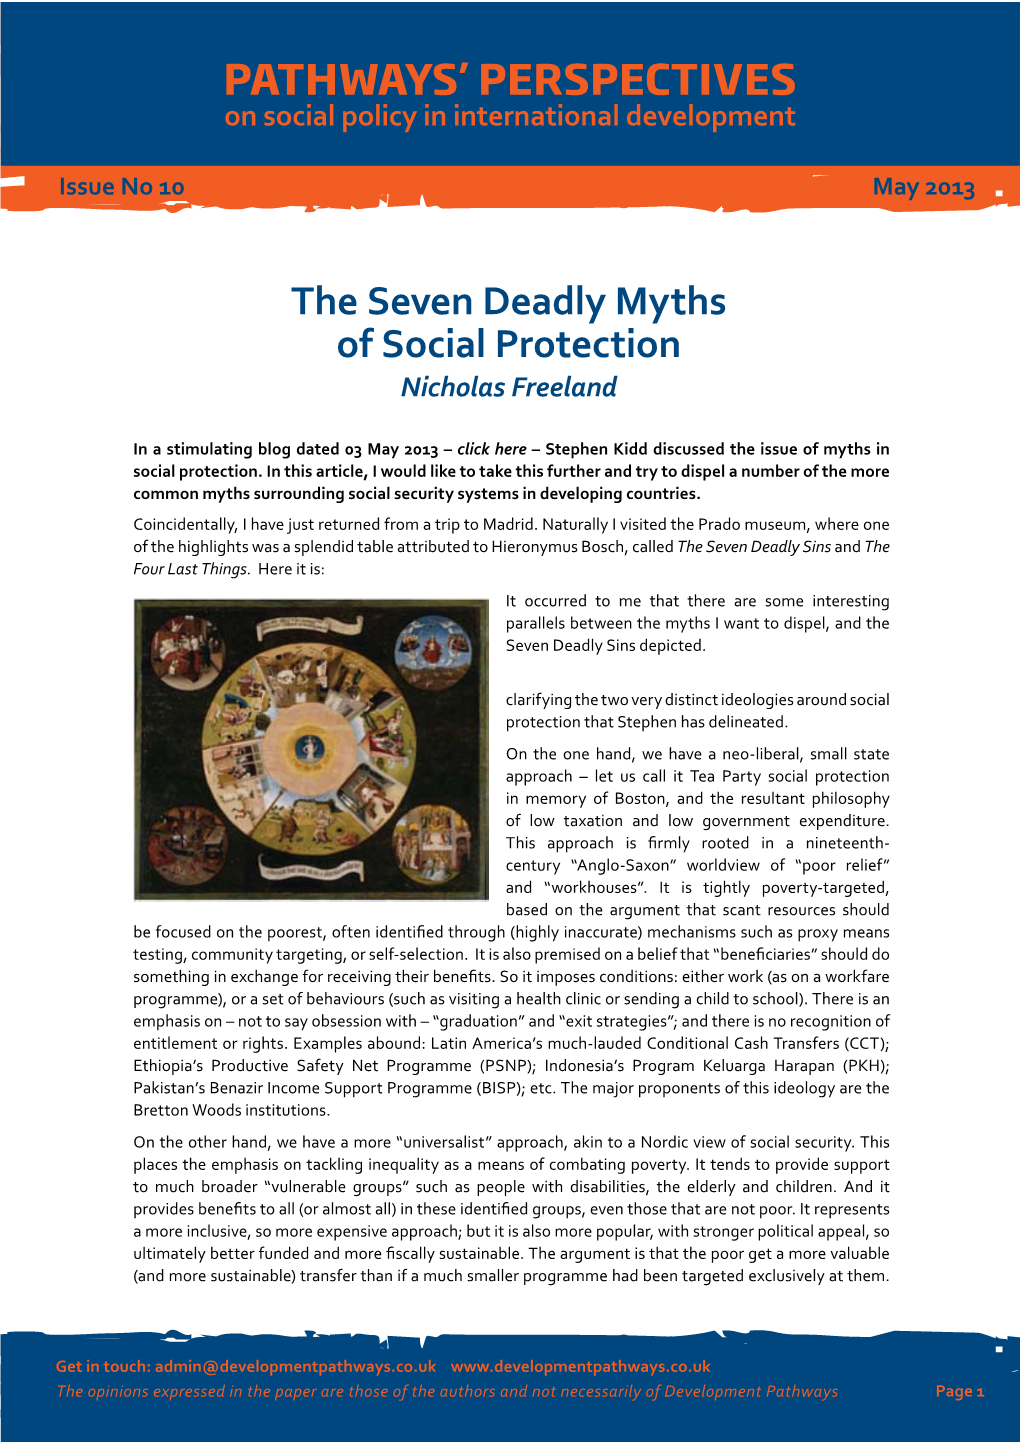 PATHWAYS' PERSPECTIVES the Seven Deadly Myths of Social